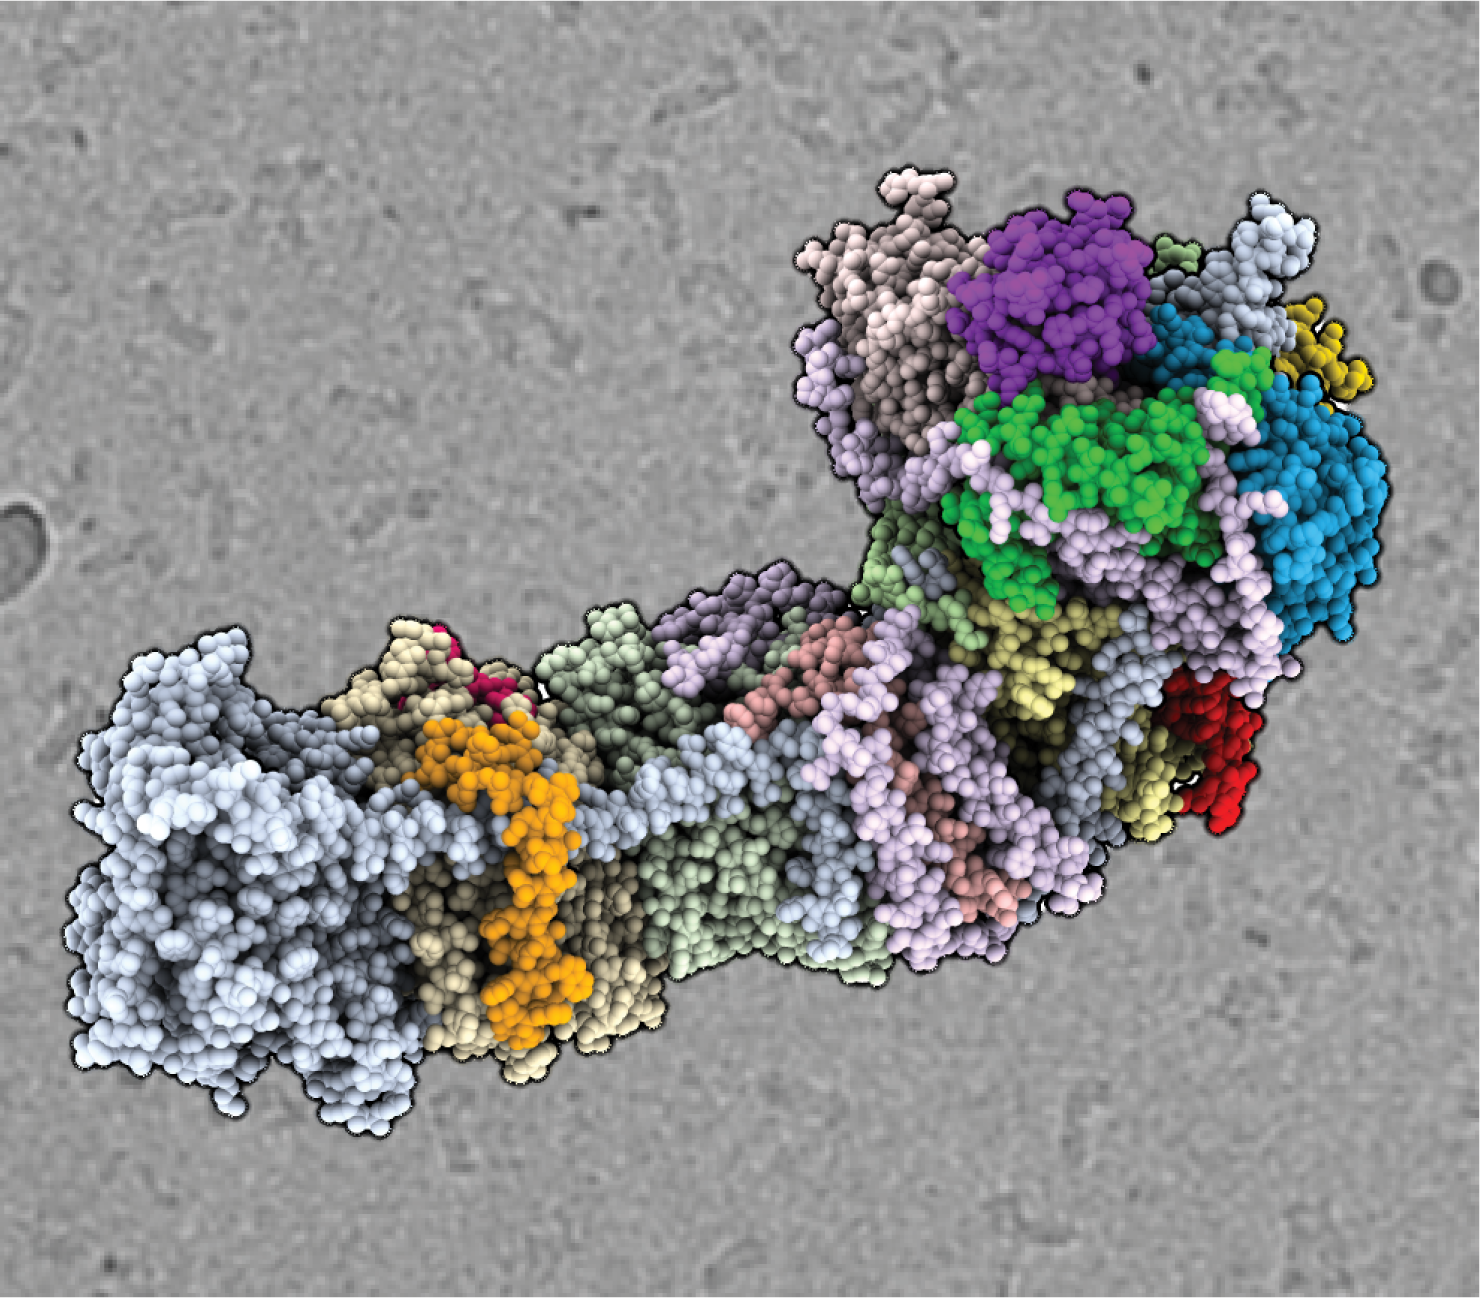 Image - The cryo-EM structure of the NAD(P)H dehydrogenase-like complex (NDH). The atomic coordinate model shown as spheres, colored according to the different subunits, in front of an electron micrograph of frozen NDH particles in the background. (Credit: Thomas Laughlin/UC Berkeley and Berkeley Lab)